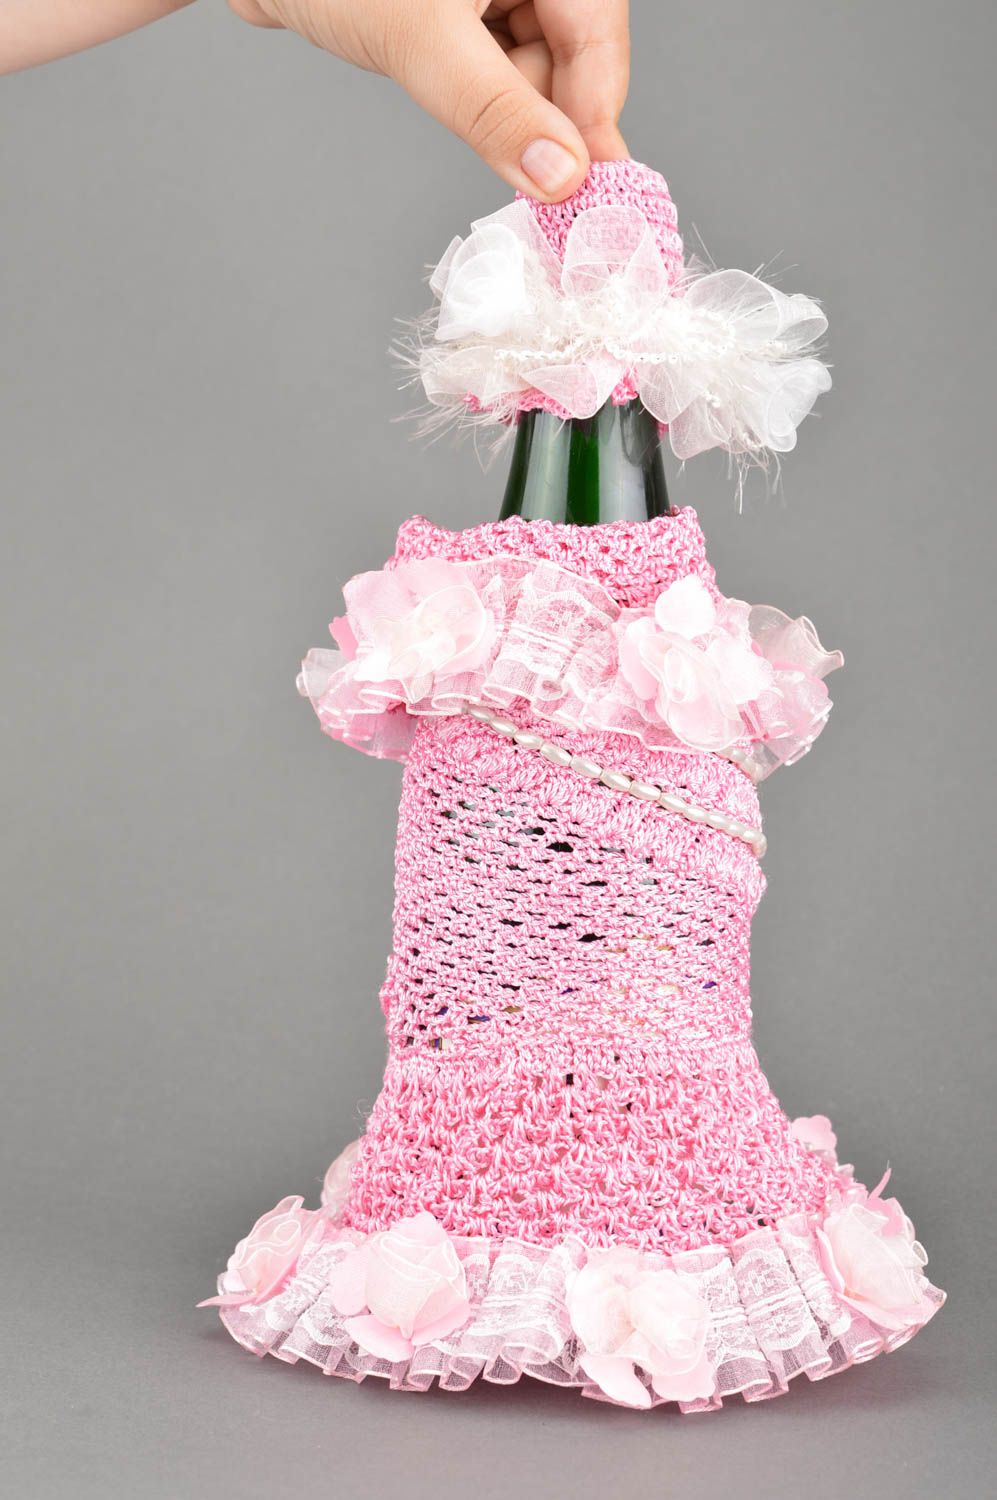 Handmade decorative bottle cozy crocheted pink dress with lacy hat cover photo 3